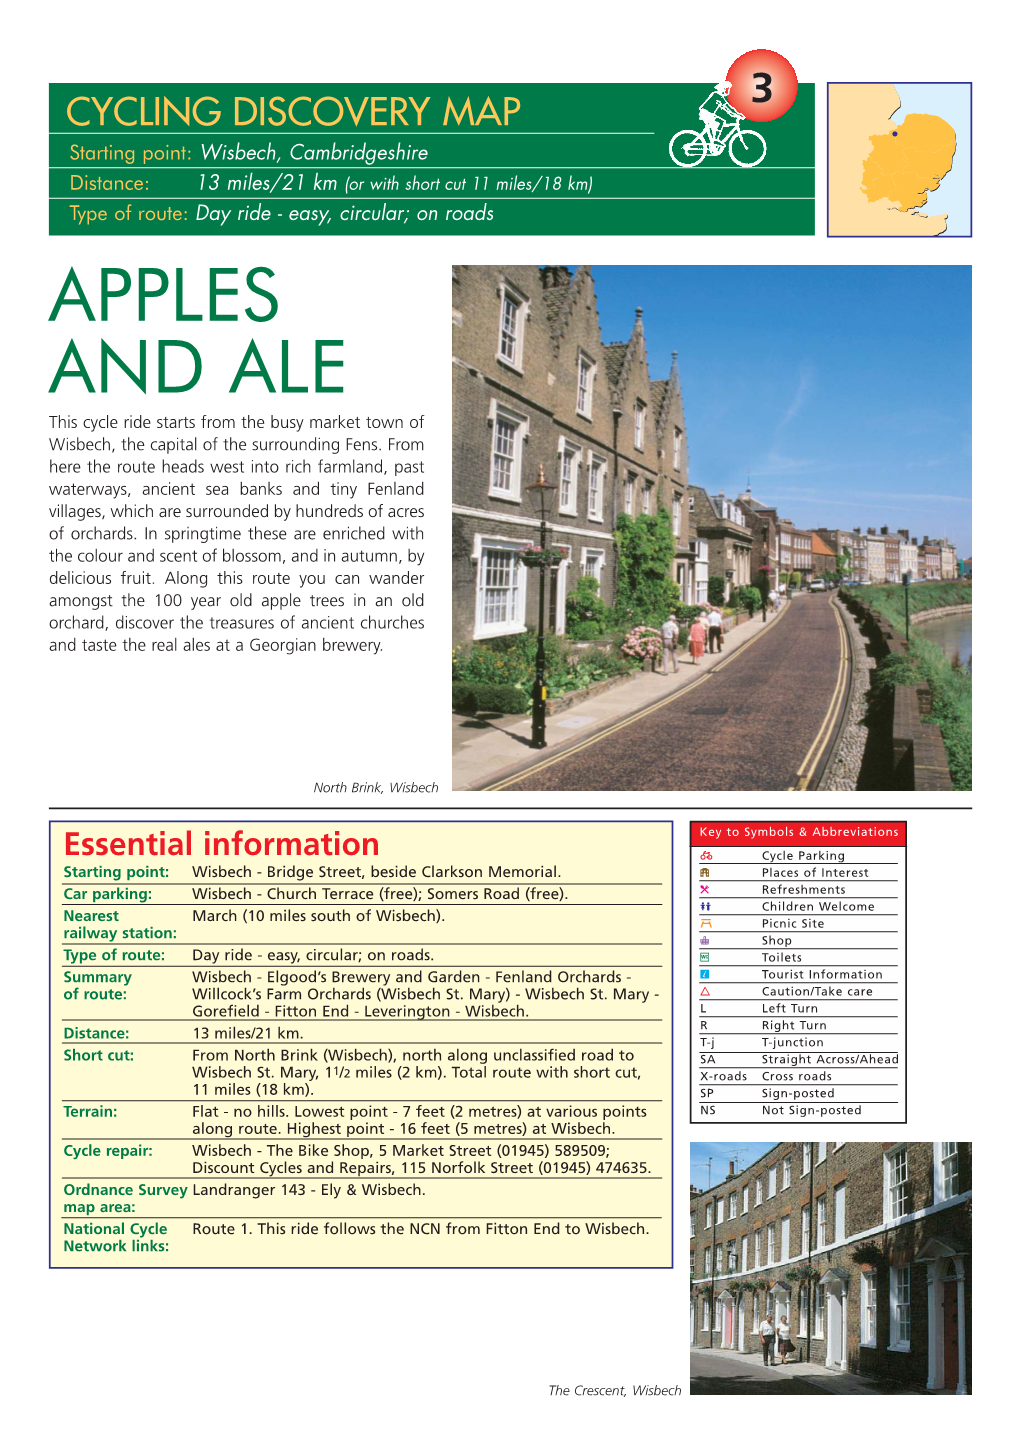 APPLES and ALE This Cycle Ride Starts from the Busy Market Town of Wisbech, the Capital of the Surrounding Fens